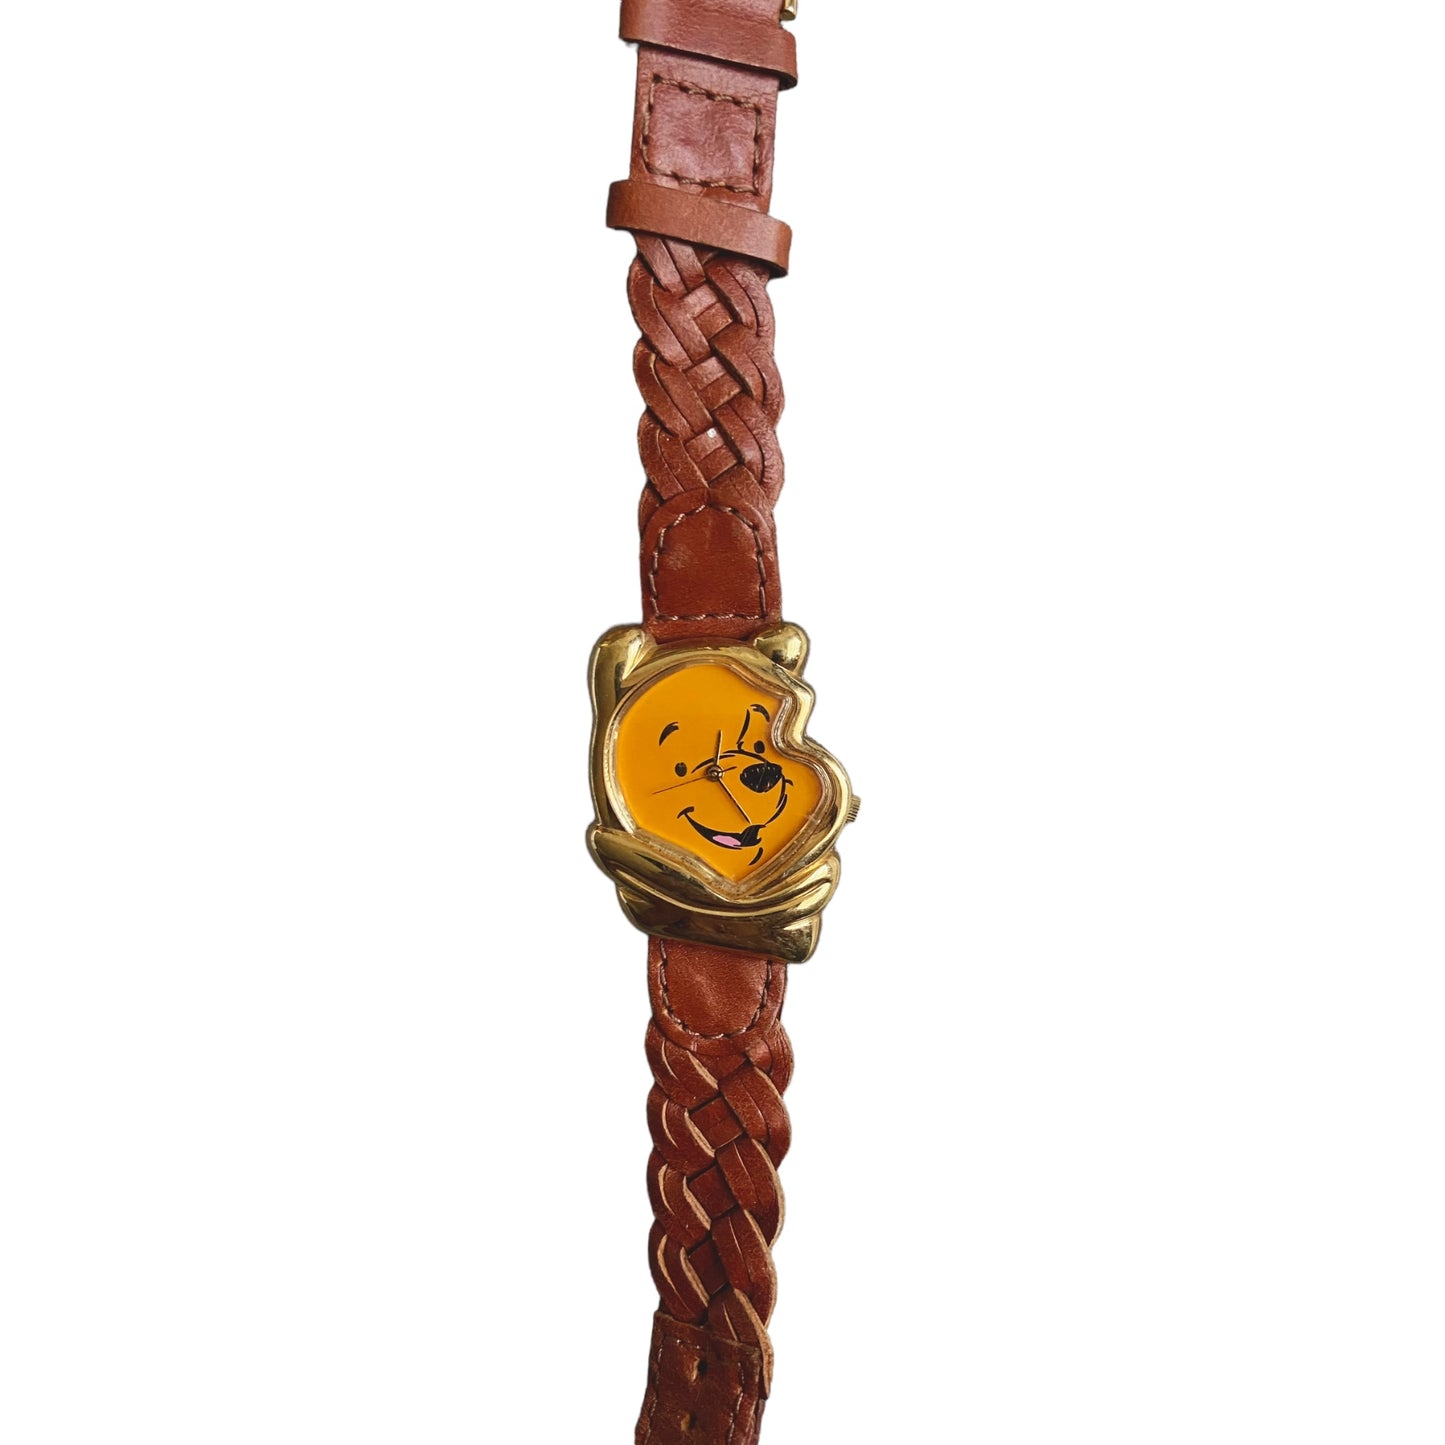 One-of-one | Pooh timex watch